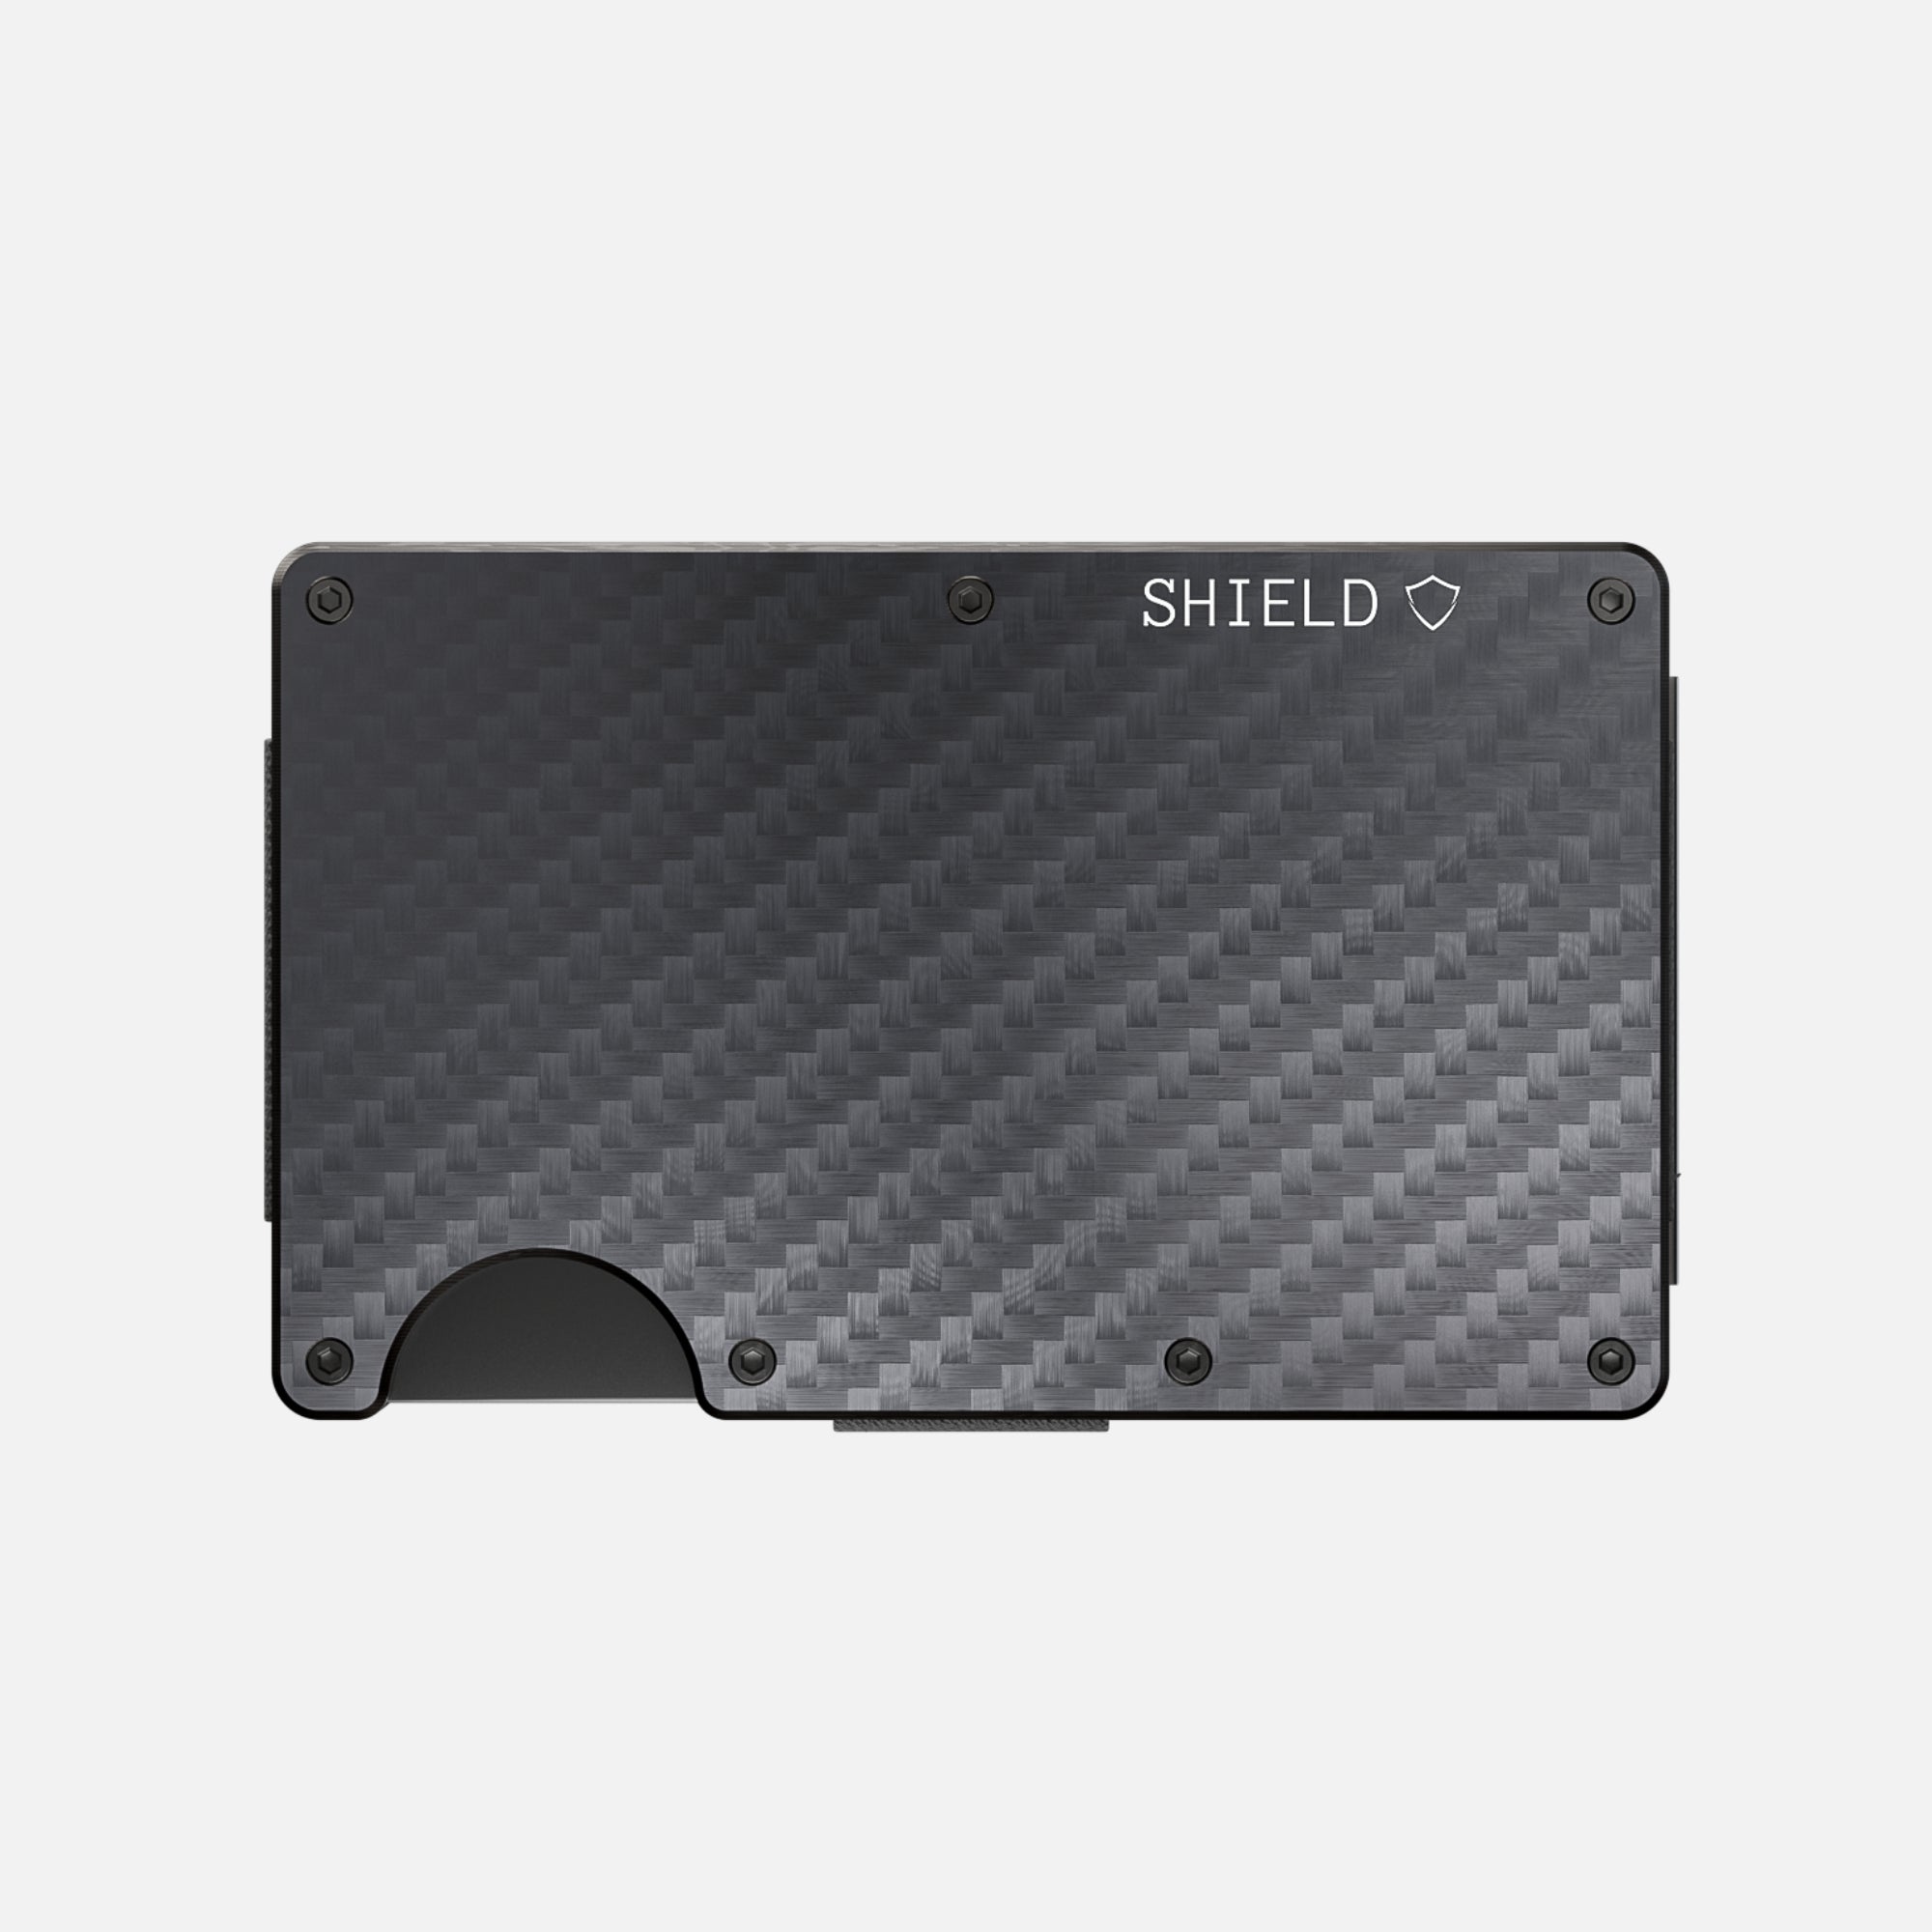 The Shield Wallet